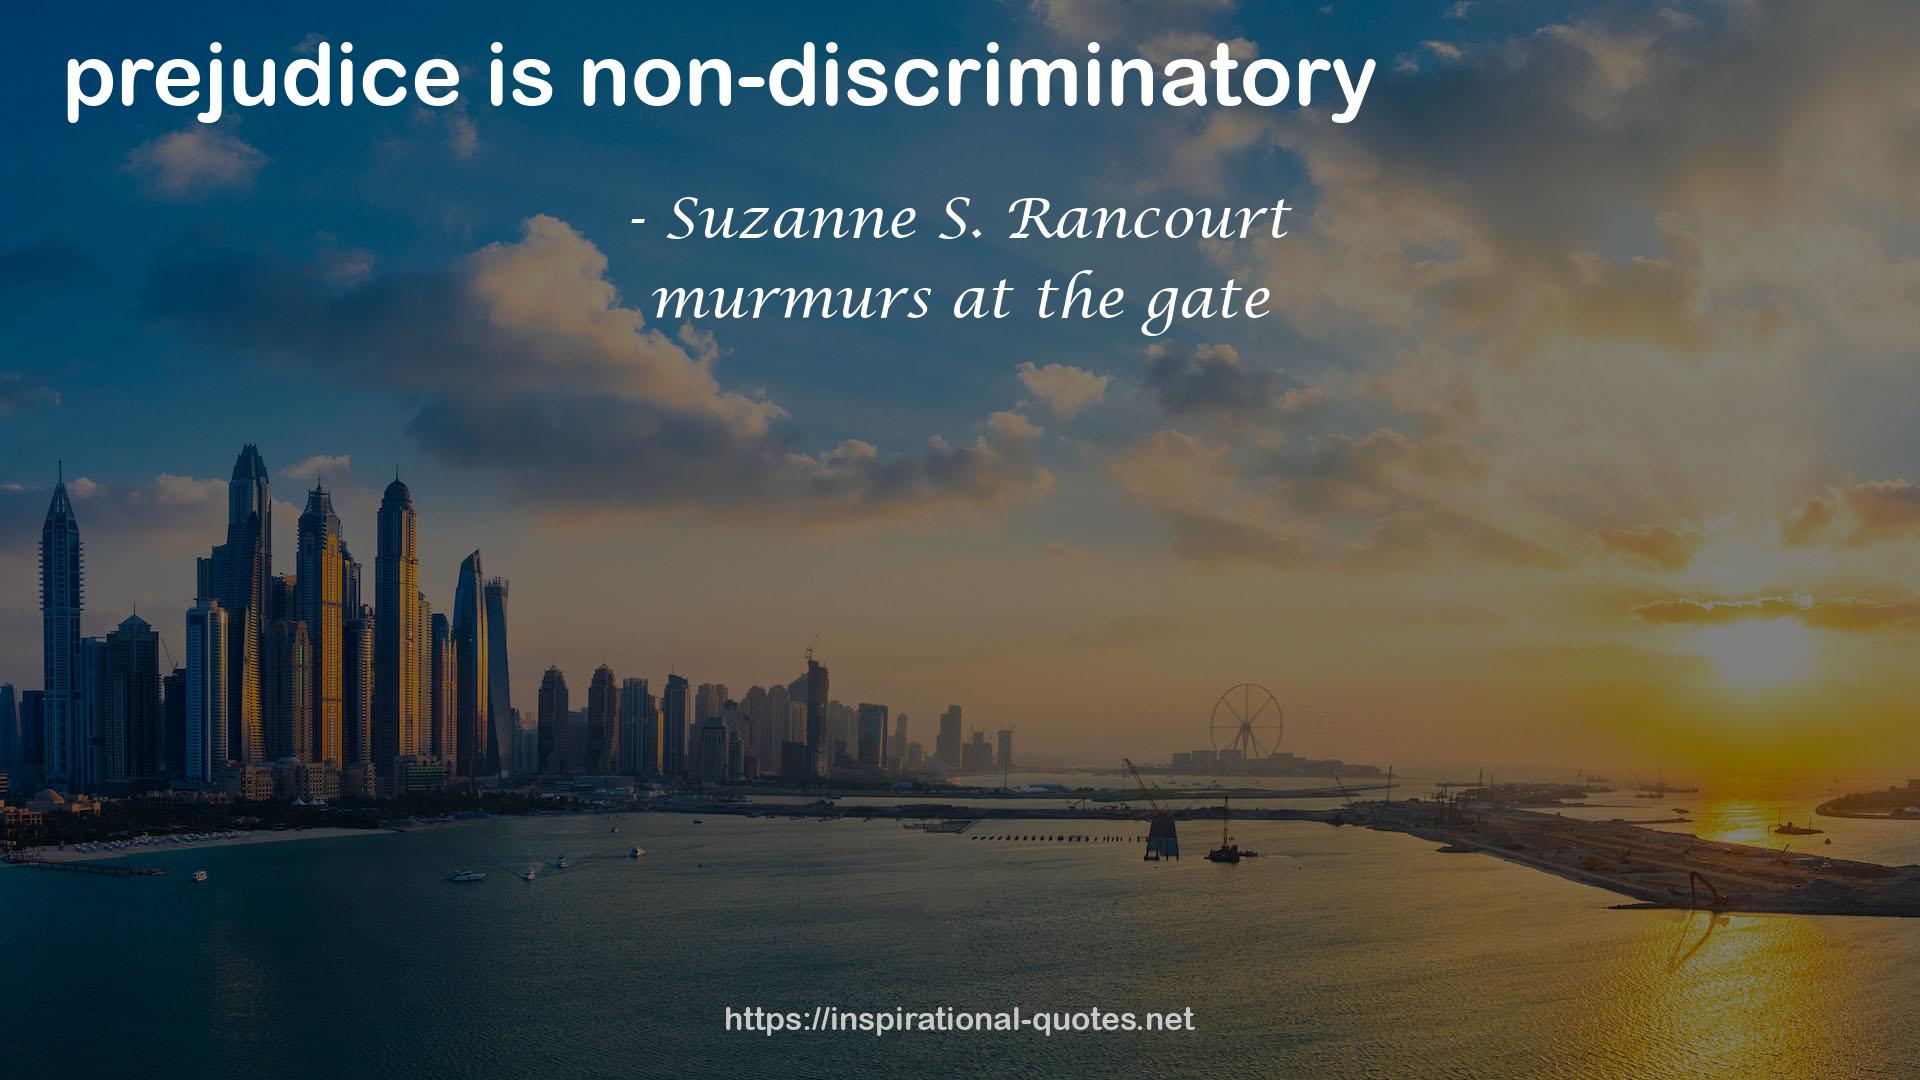 Suzanne S. Rancourt QUOTES